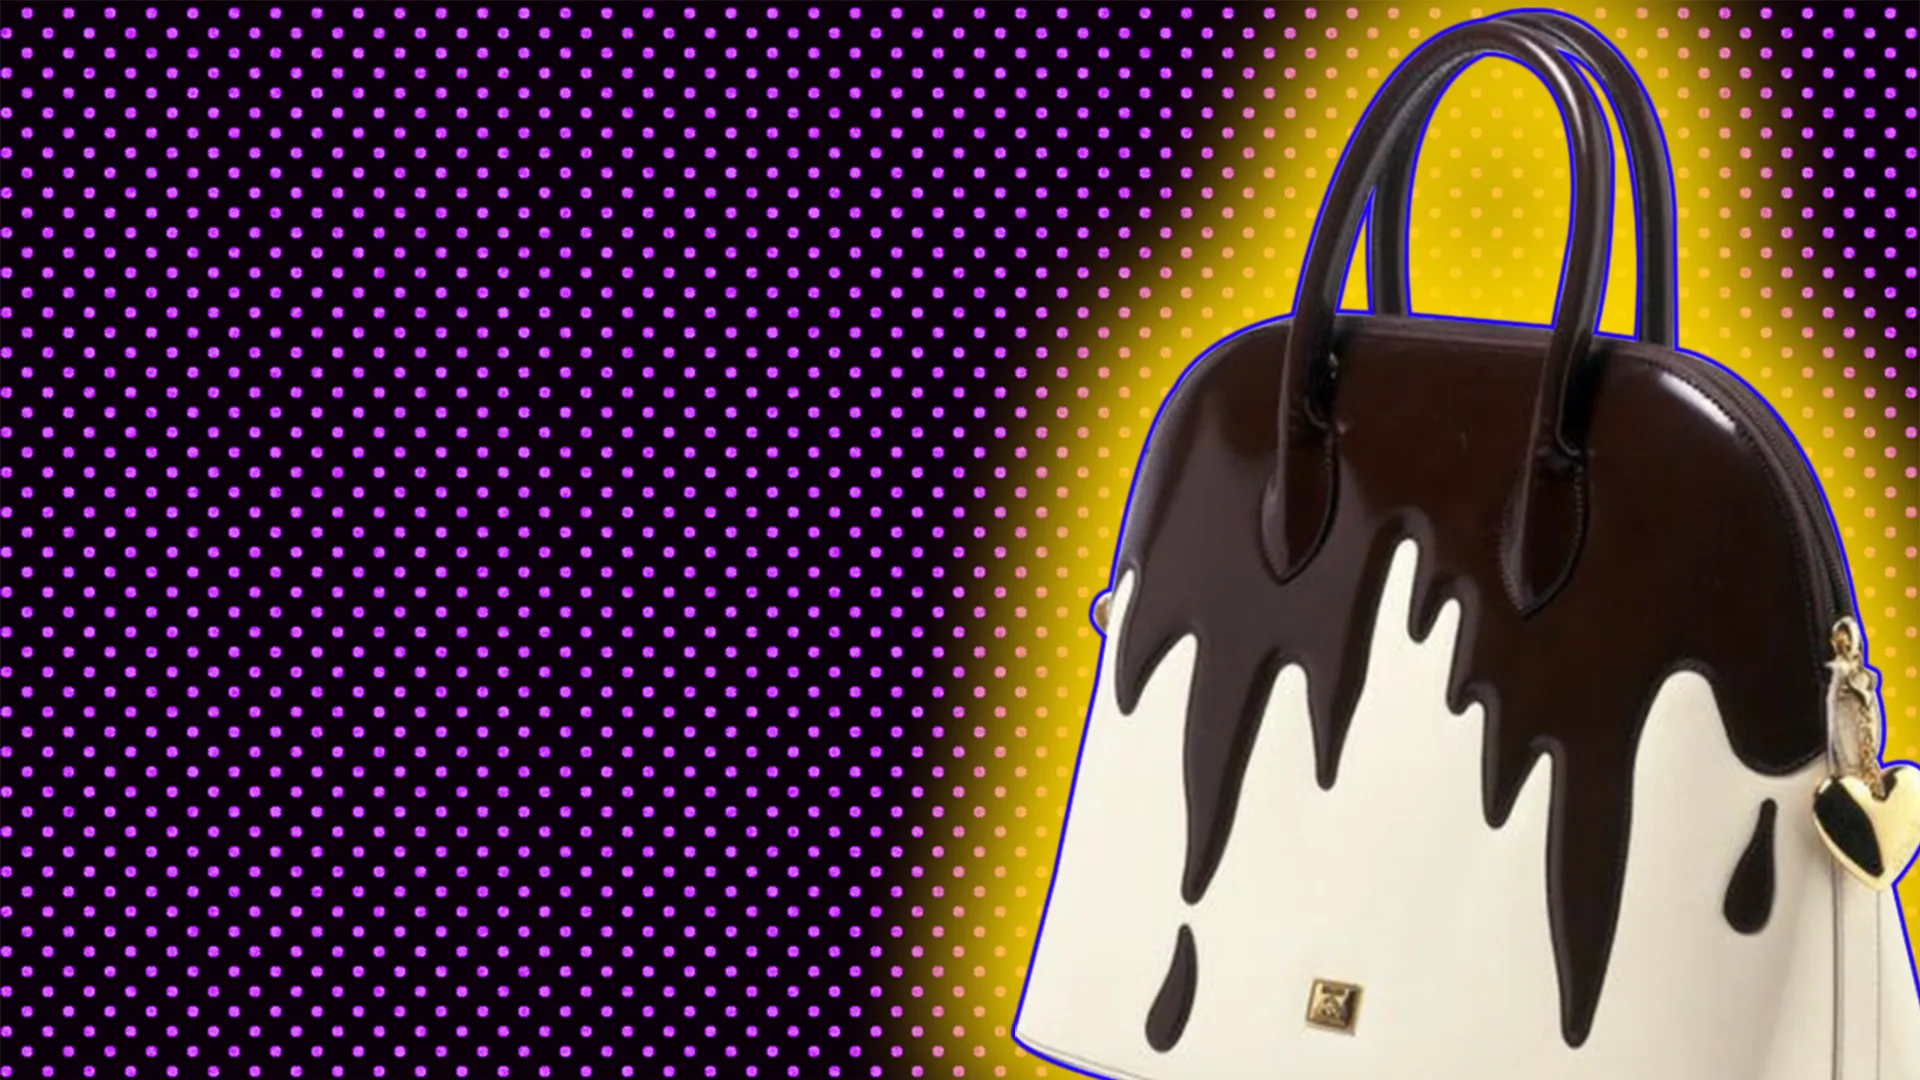 'Fudge The Fashionistas, Let Them Eat Cake' handbag, with a polkadot background and a glow around the image